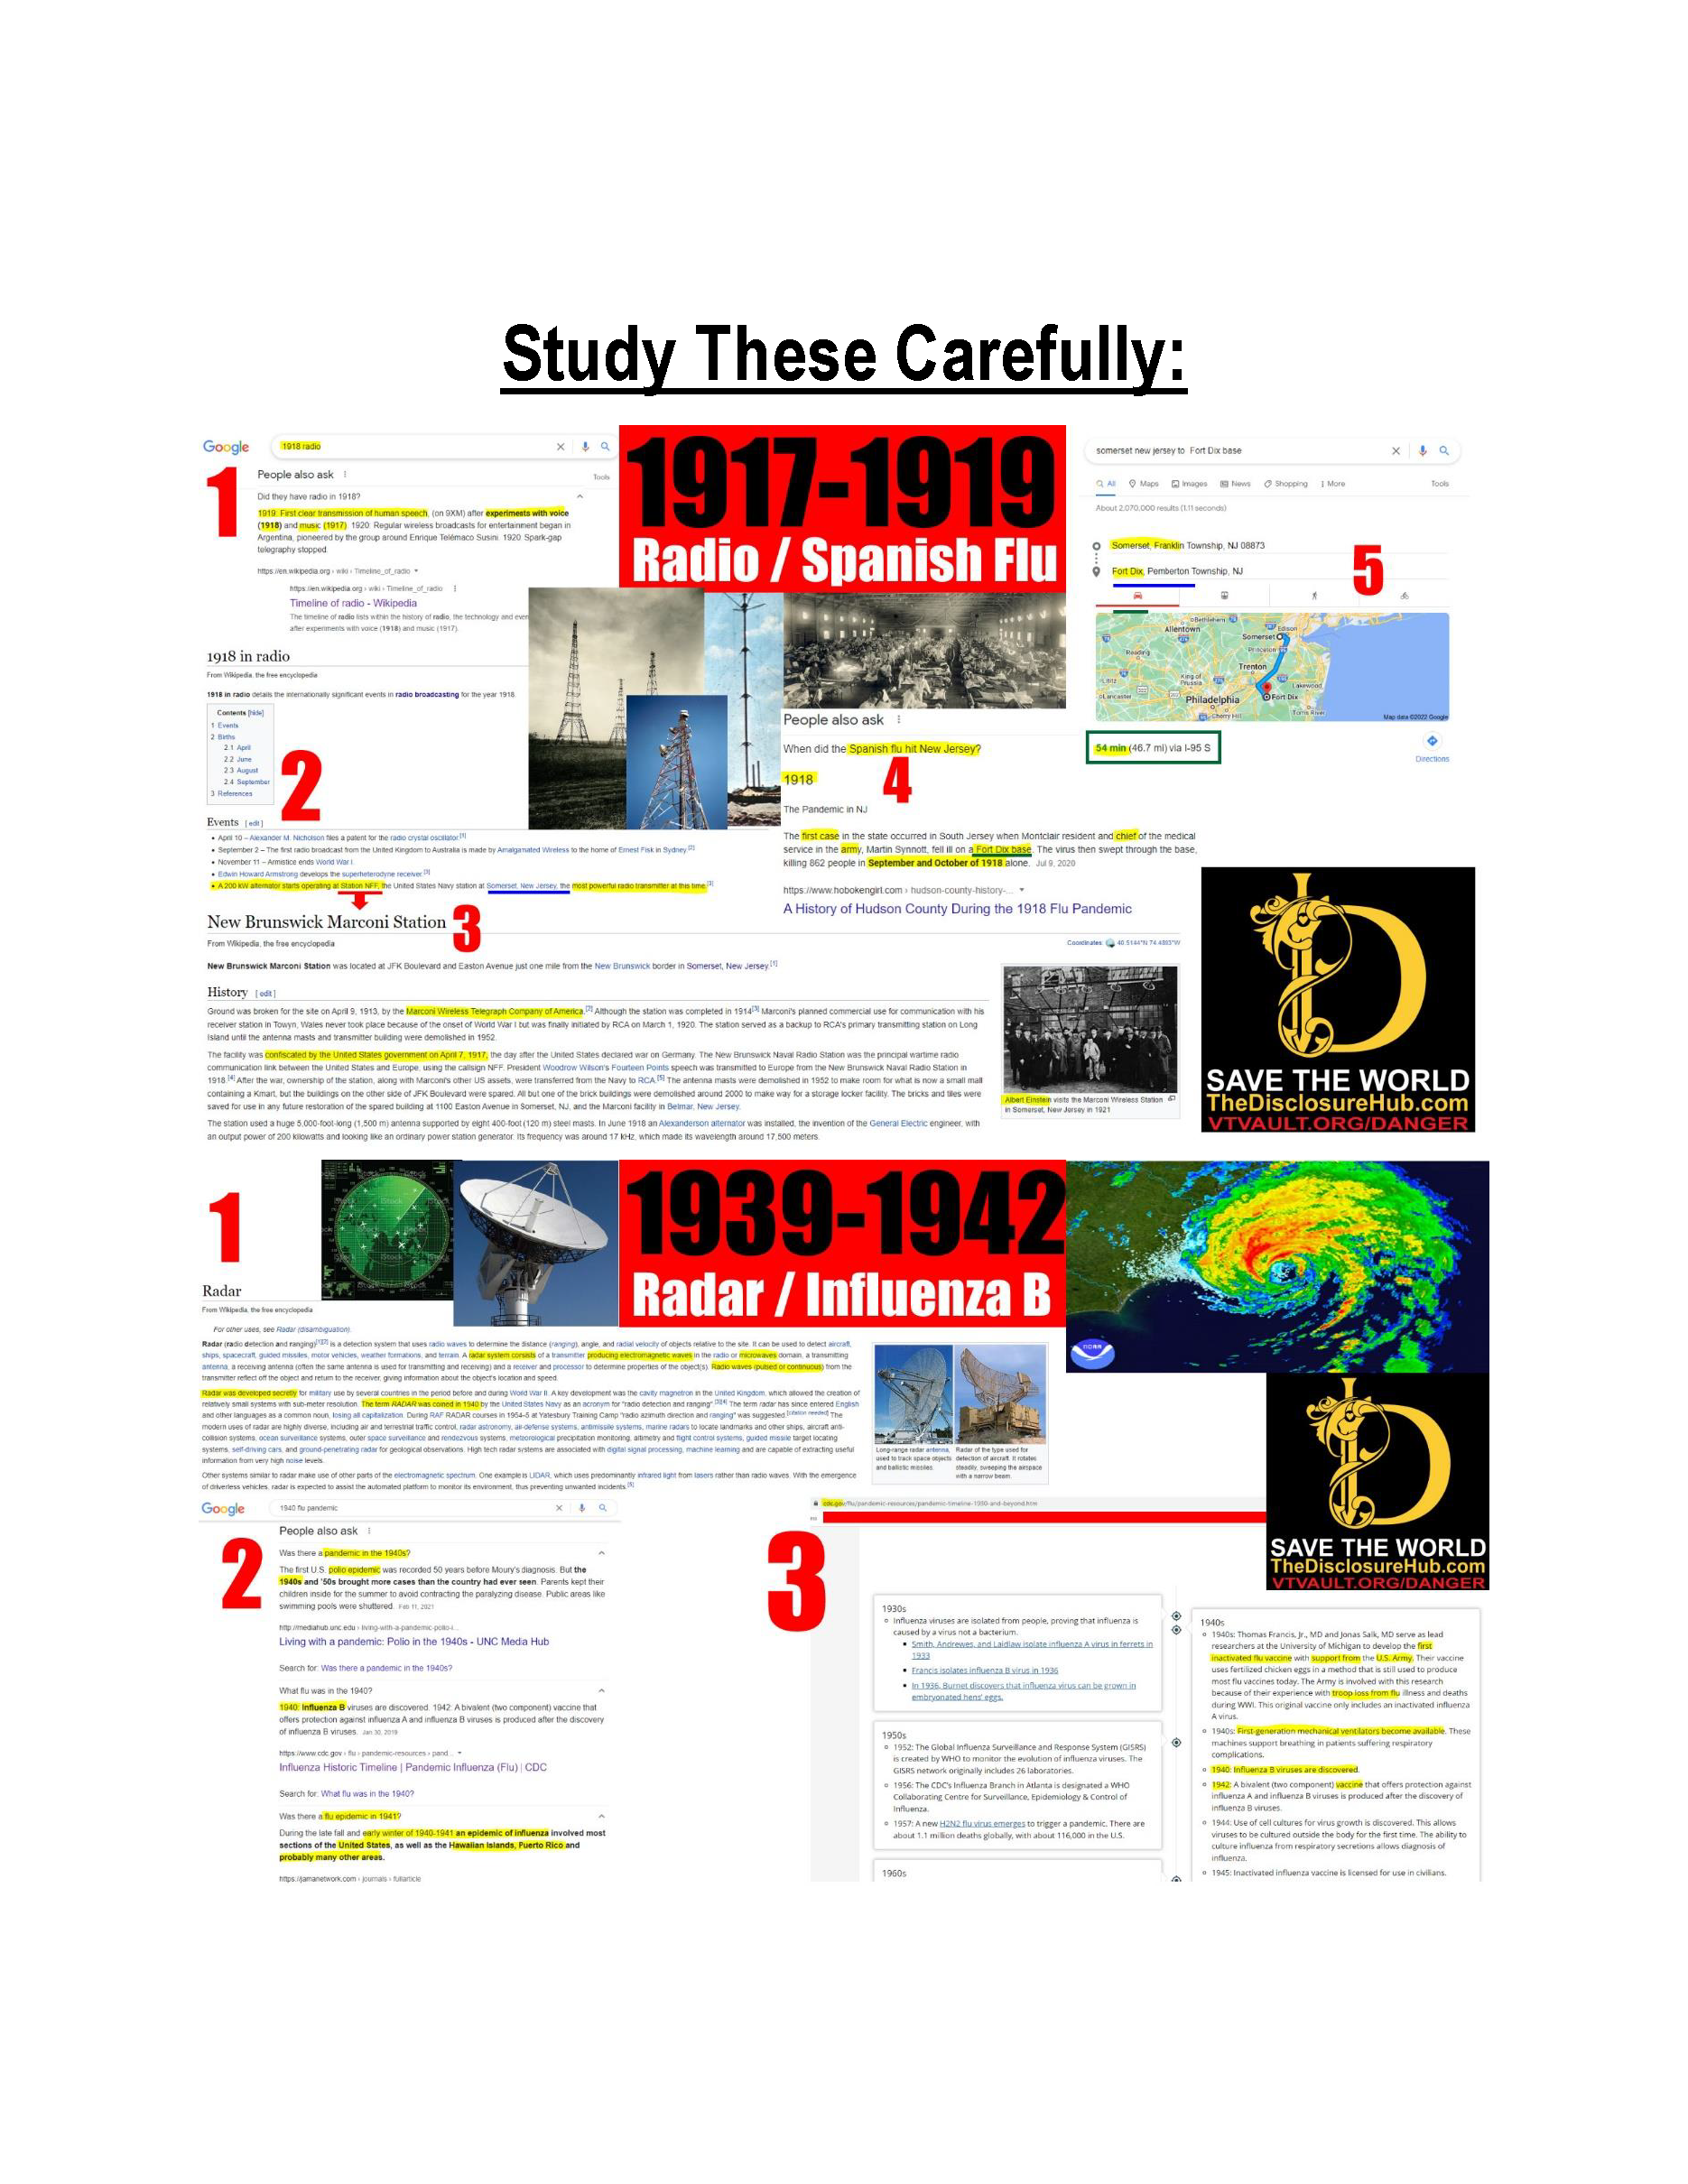 20 Plus Studies to Save the World and Your Family by thedisclosurehub.com_Page_28.png